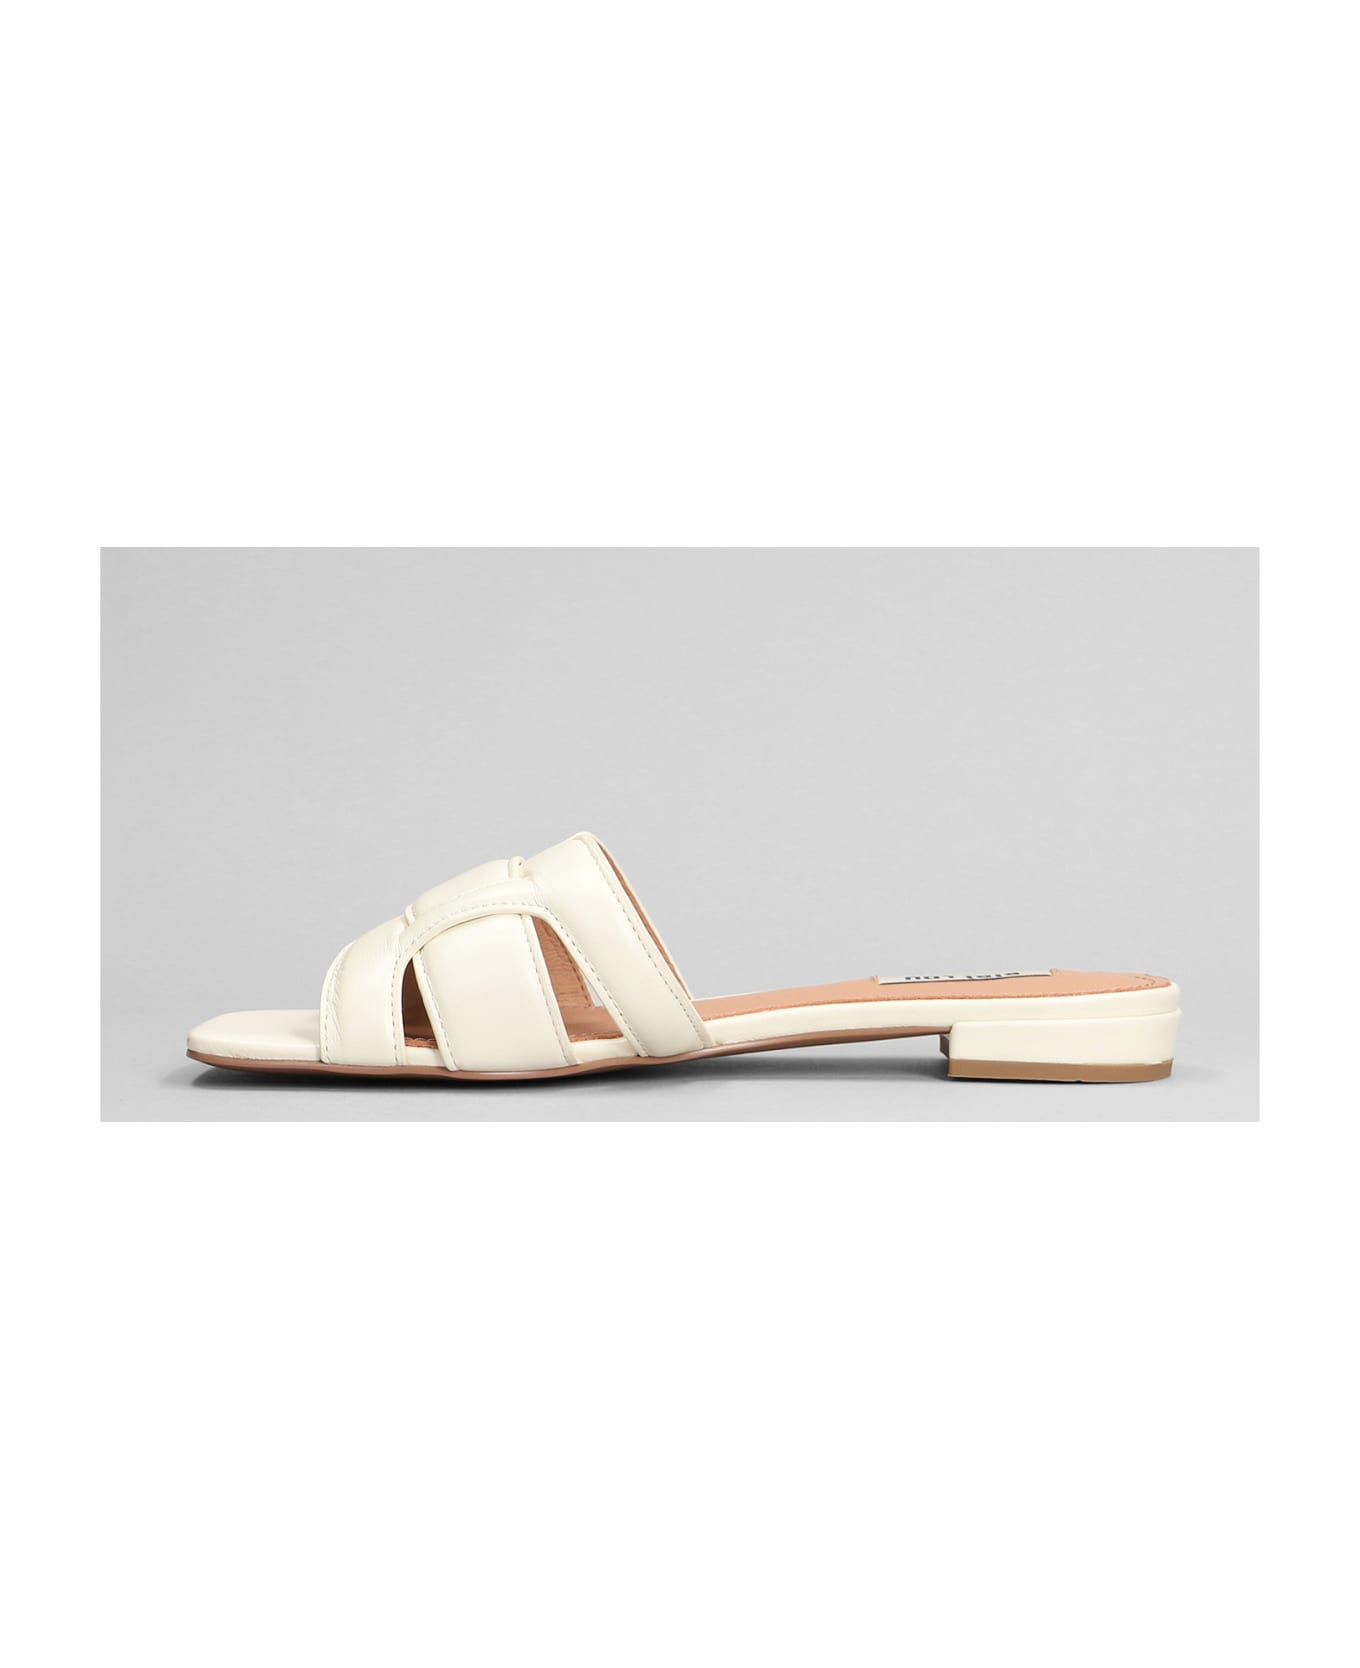 Bibi Lou Holly Flats In White Leather - white